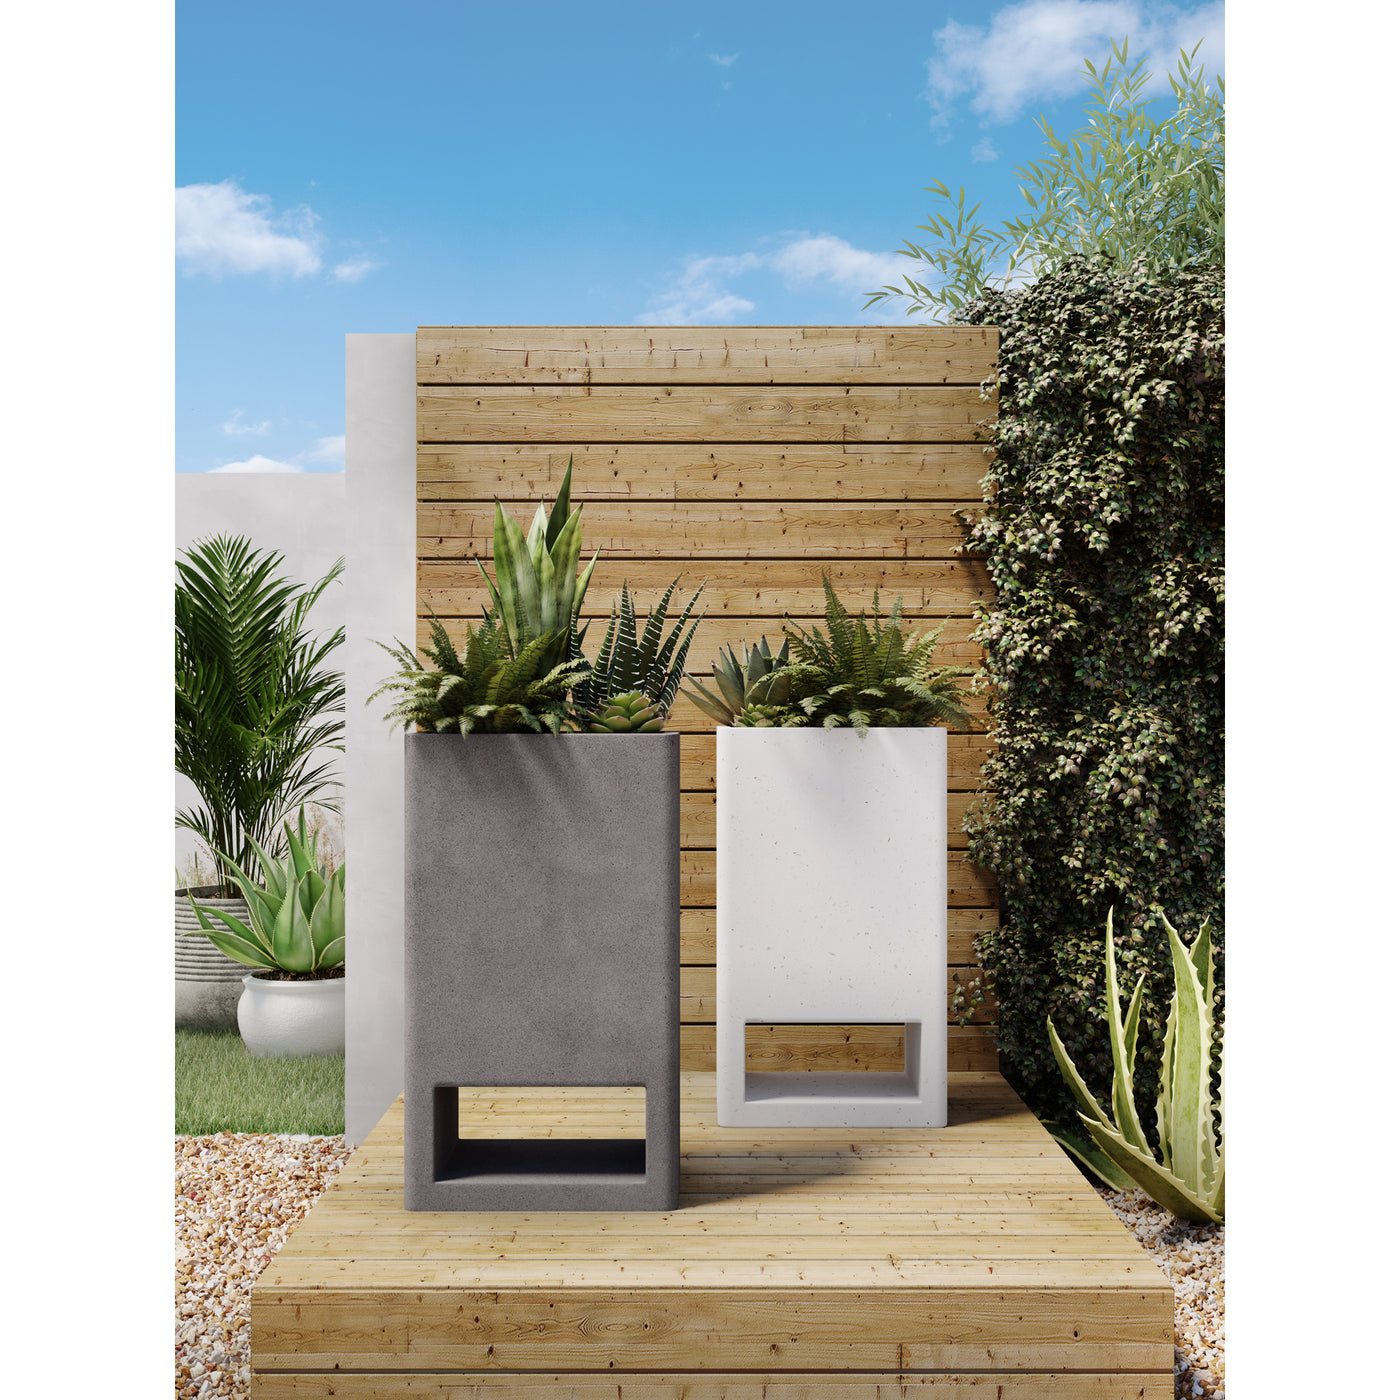 A sculptural planter to blend in seamlessly with your outdoor setting. An eye-catching base cutout and tall rectangular fo...